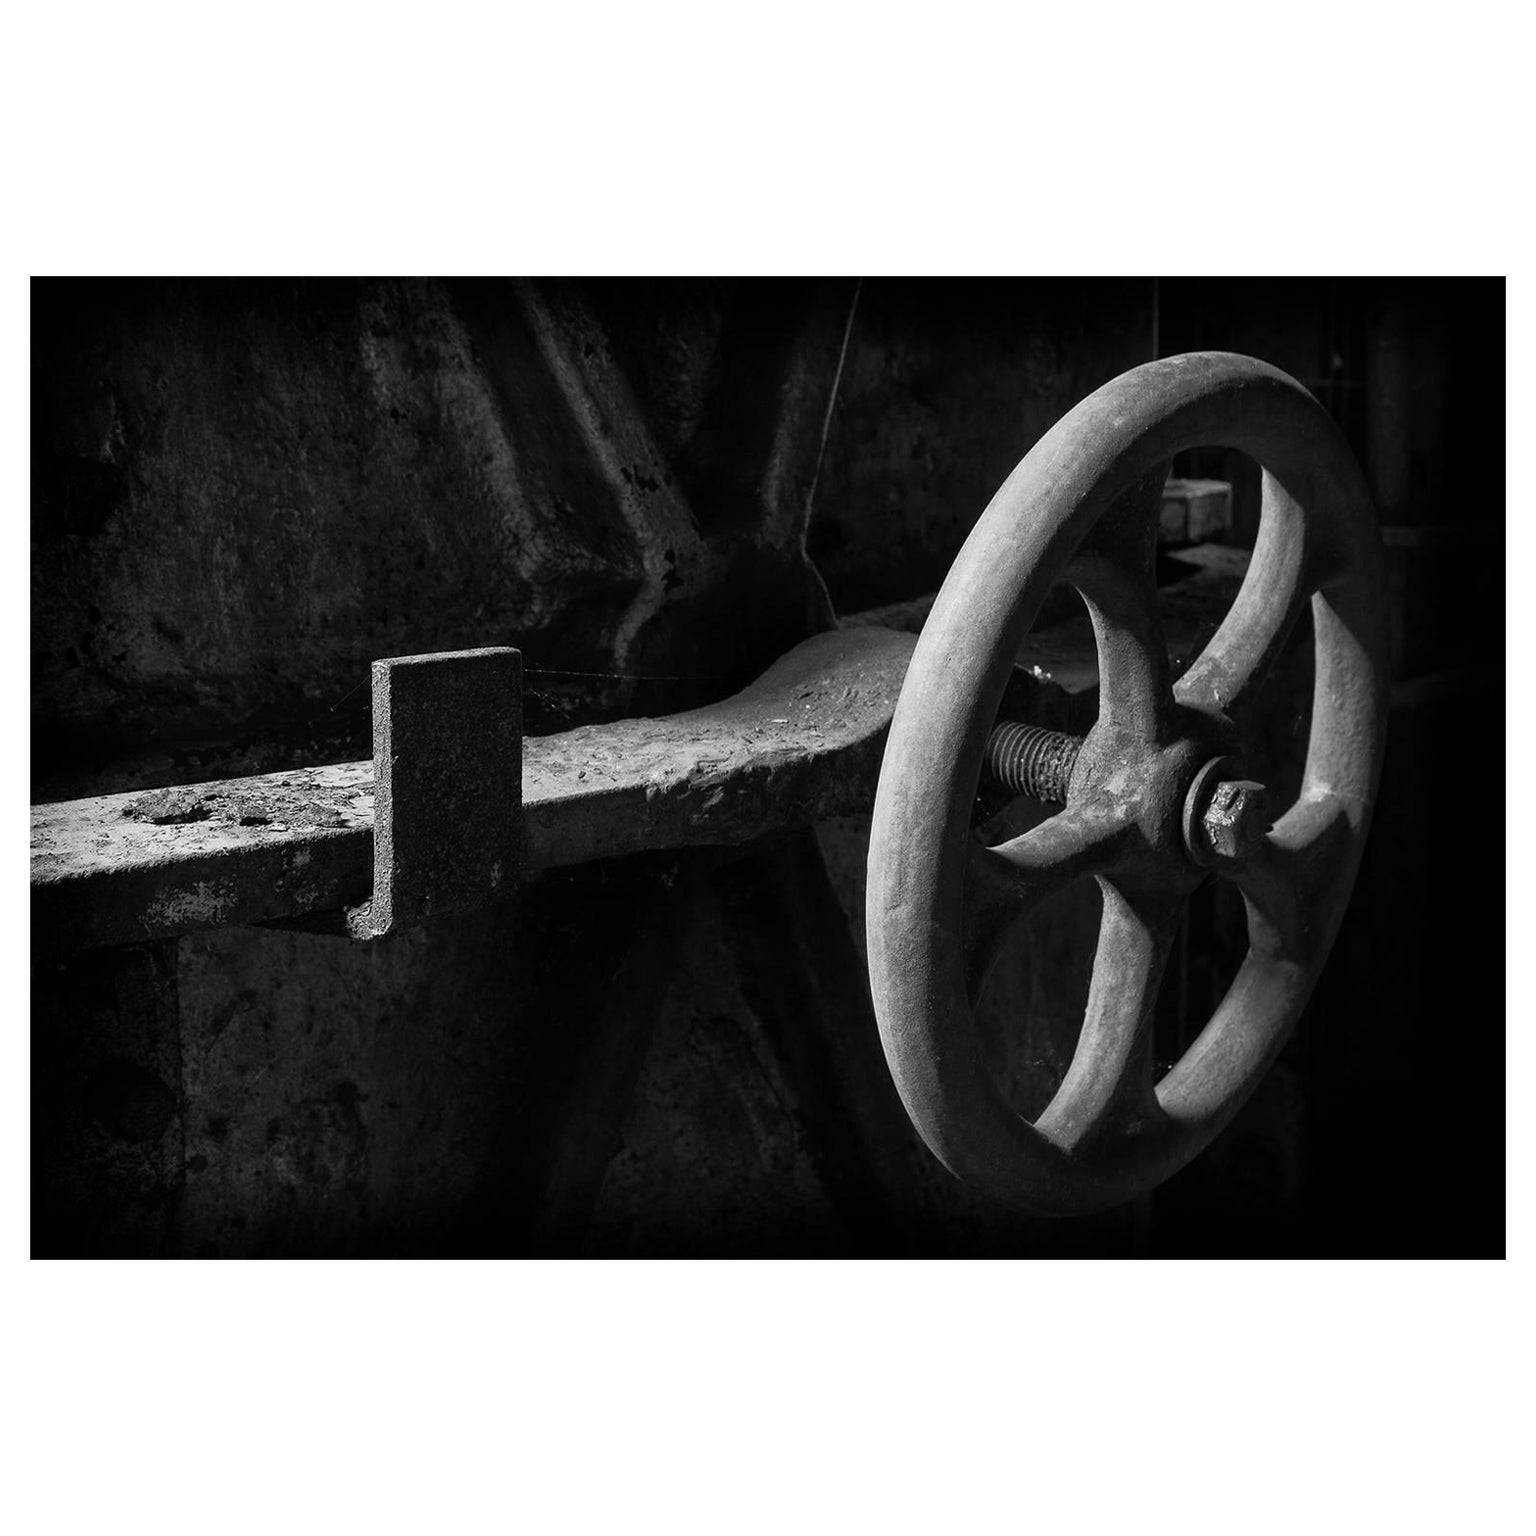 Rebecca Skinner Still-Life Photograph - "Wheel", abandoned, silk mill, black and white, industrial, vintage, photograph